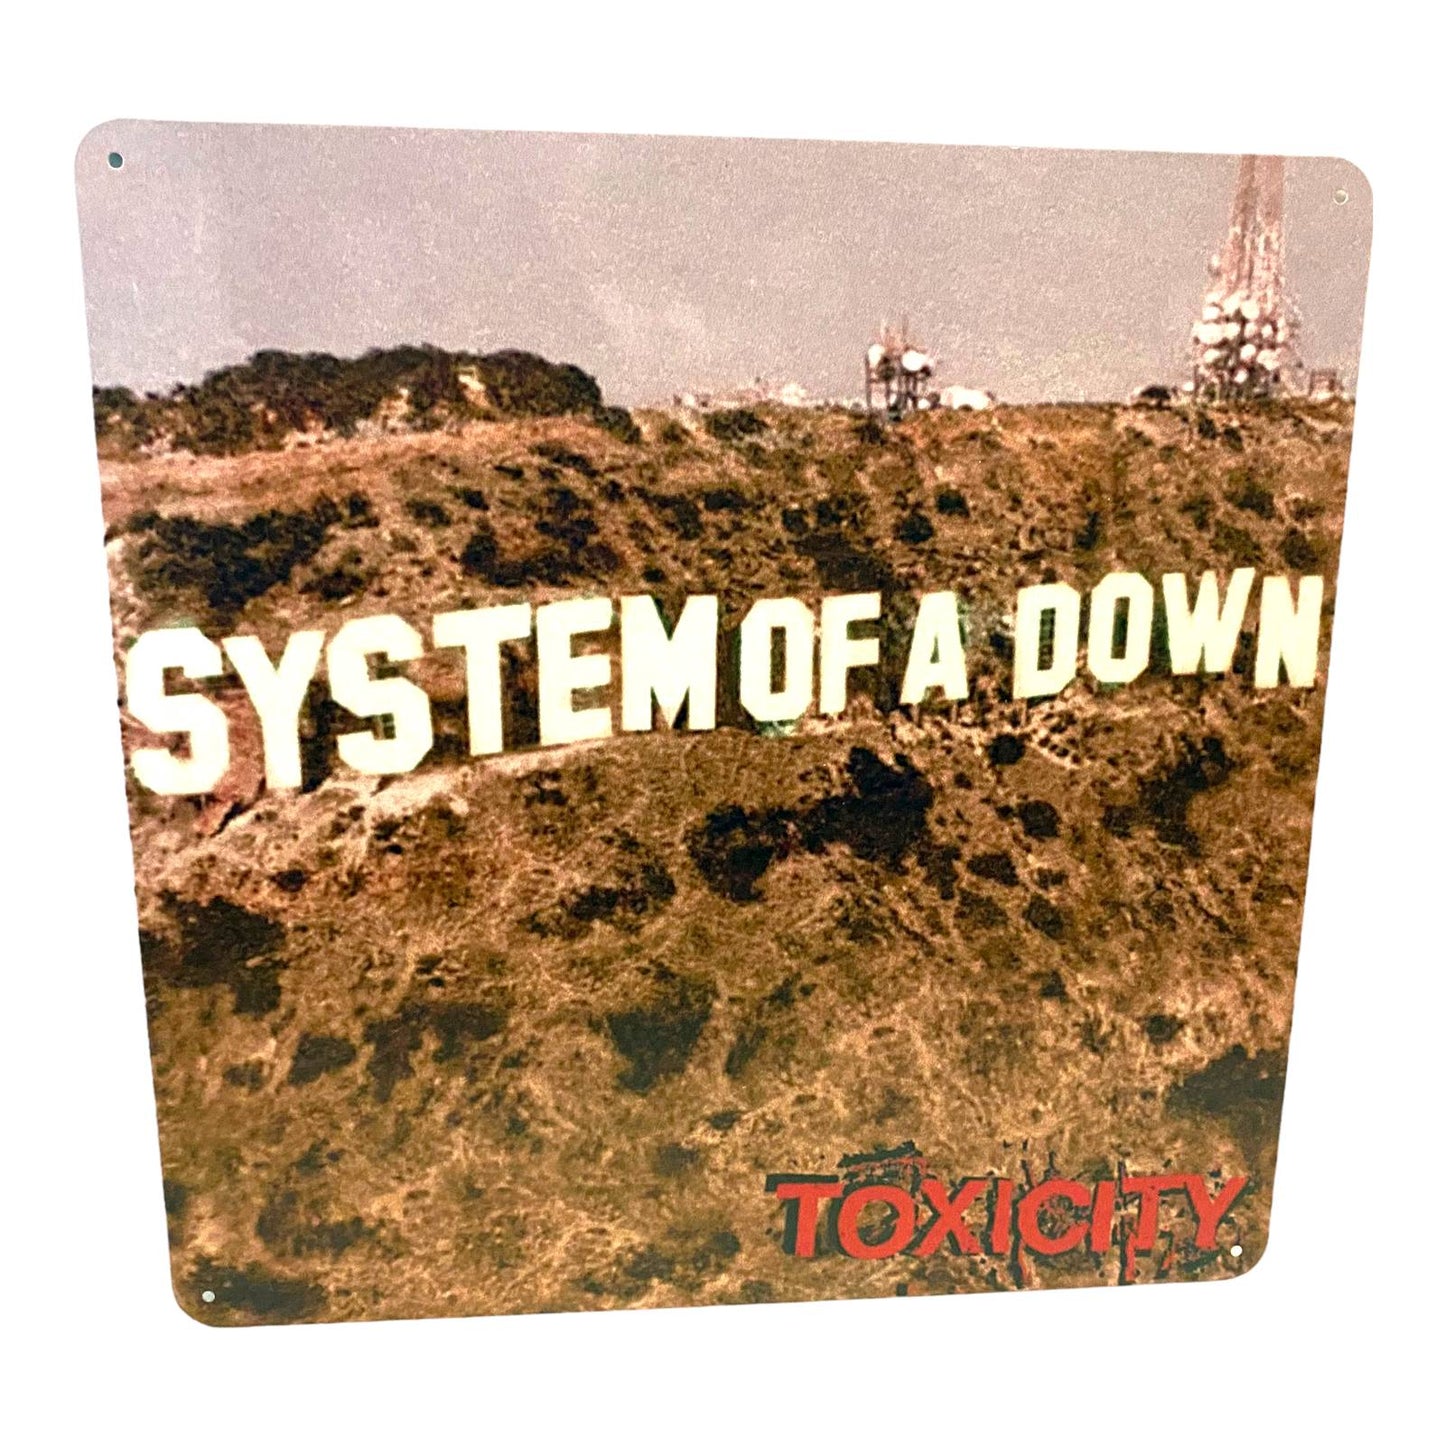 System of a Down - Toxicity AlbumCover Metal Print Tin Sign 12"x 12"